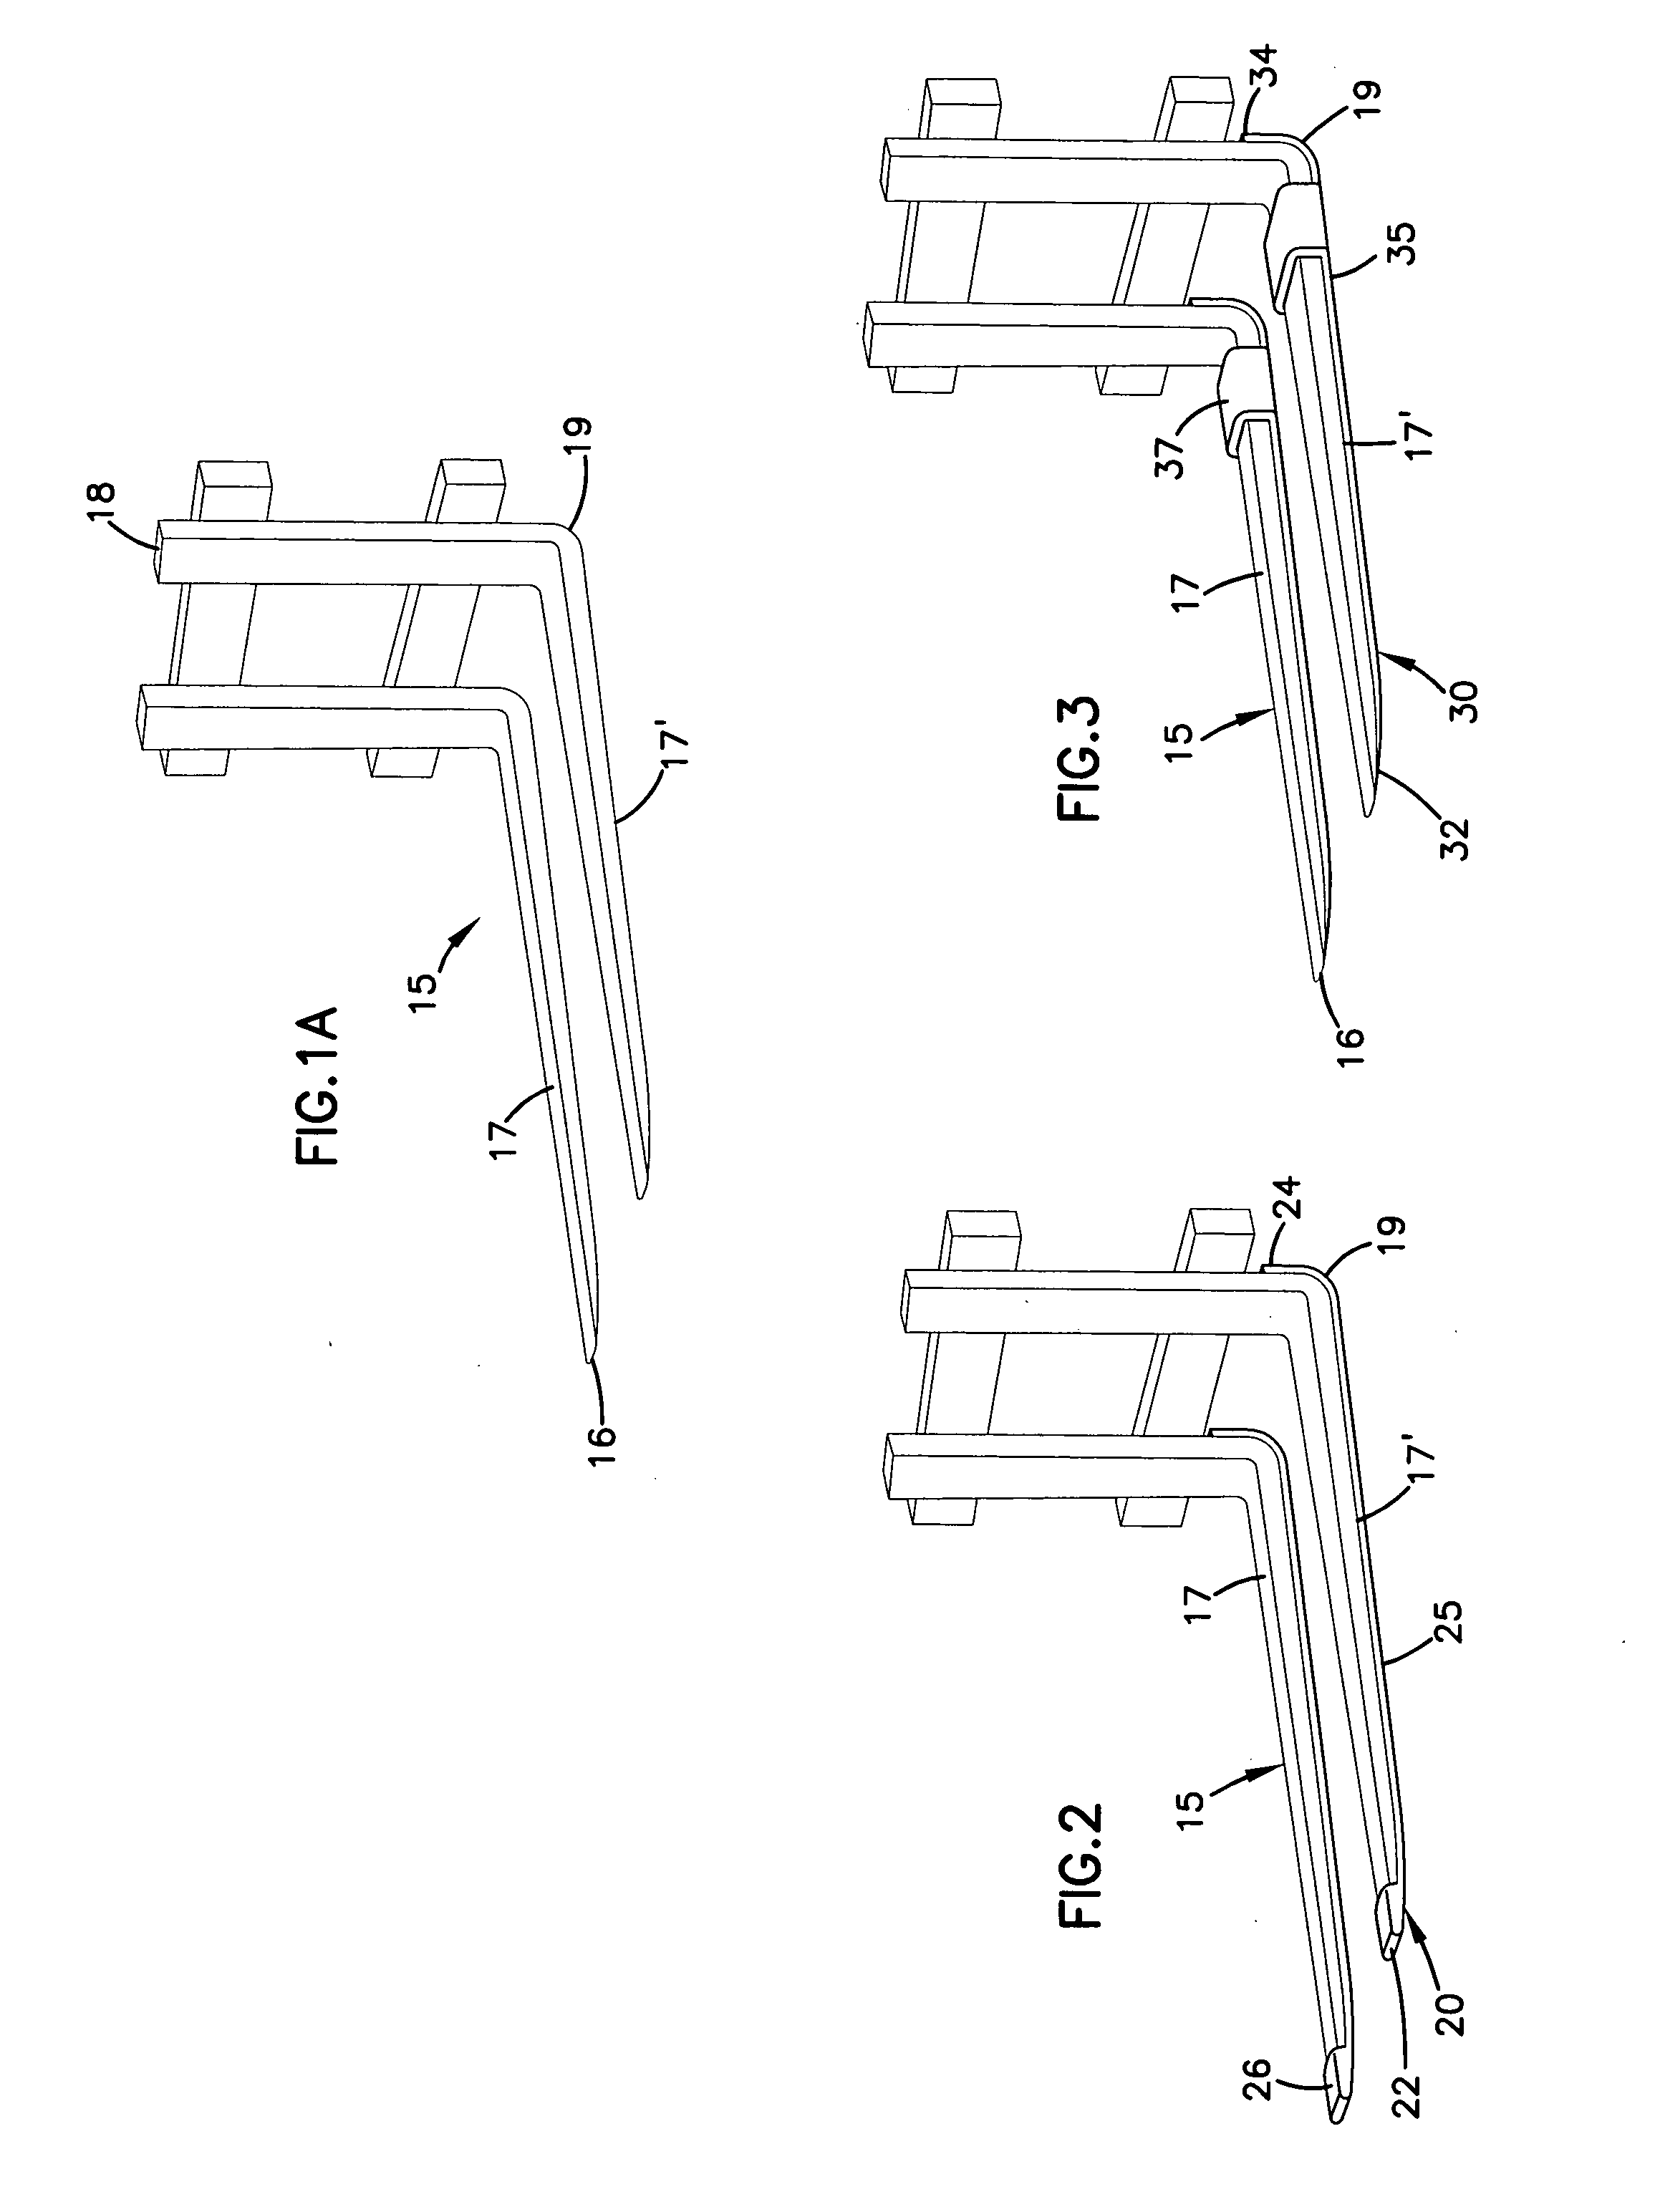 Fork lift attachment, and methods